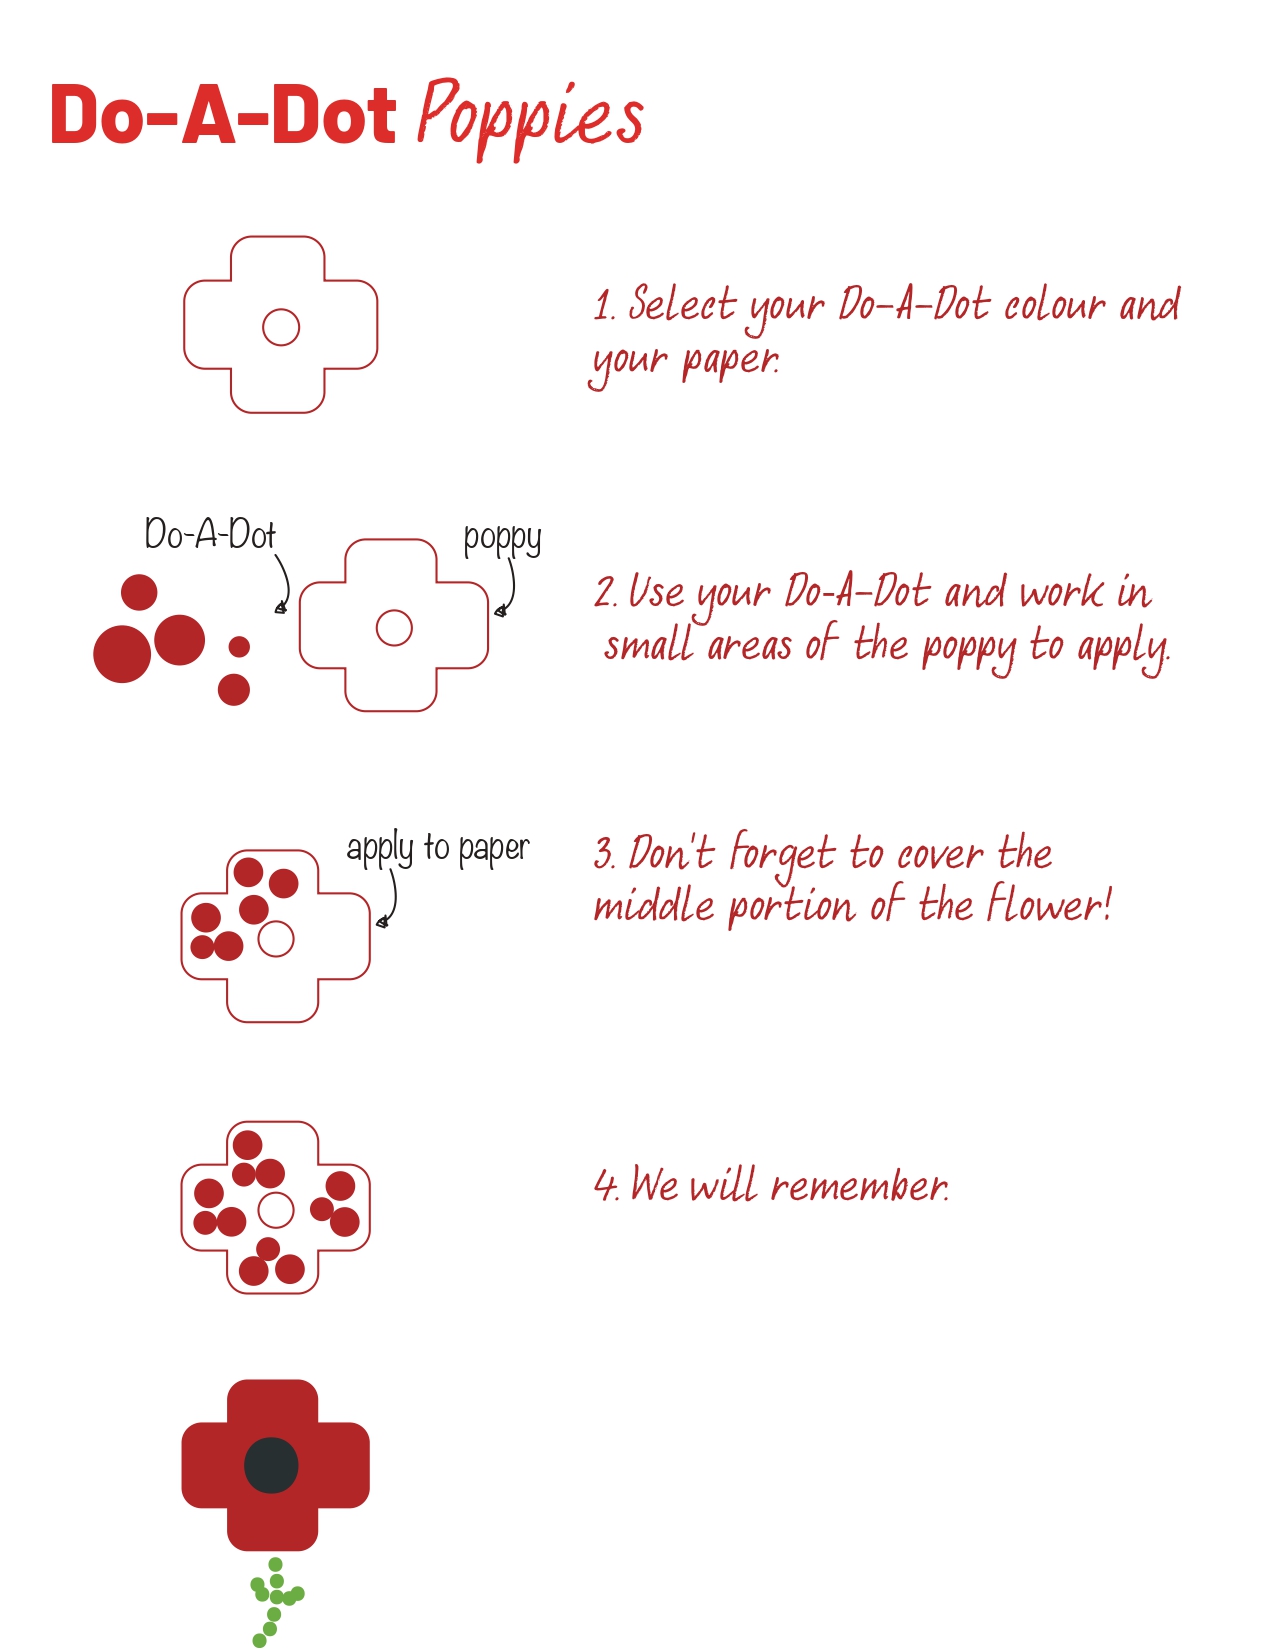 Do-A-Dot Poppies_page-0001